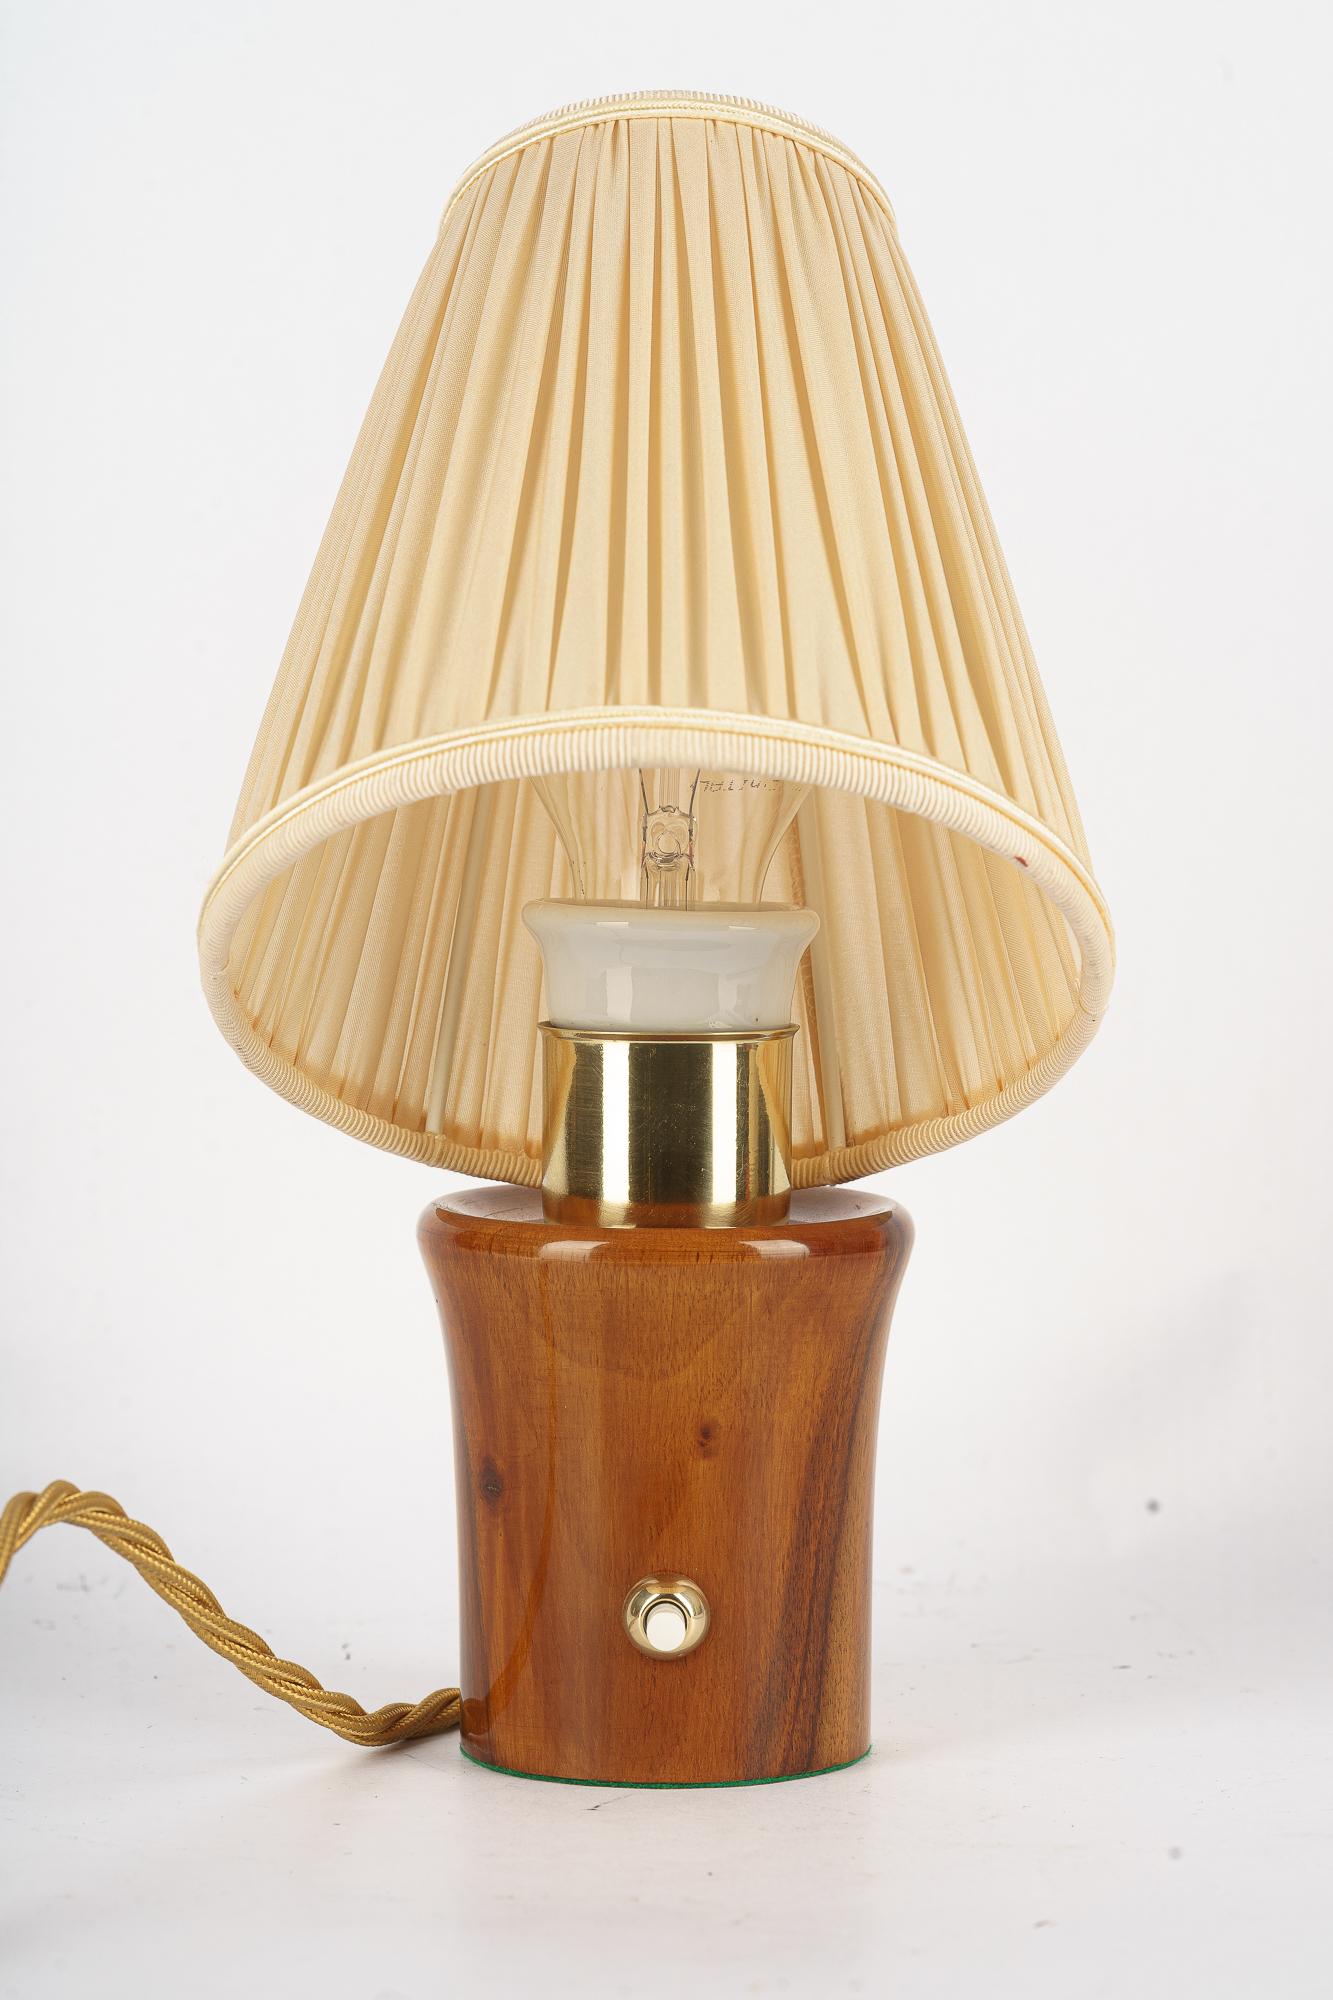 Small Rupert Nikoll cherry wood Table Lamp with fabric shade vienna around 1950s
Brass polished and stove enameled
Wood polished
The fabric shade is replaced ( new )
Bulb e27